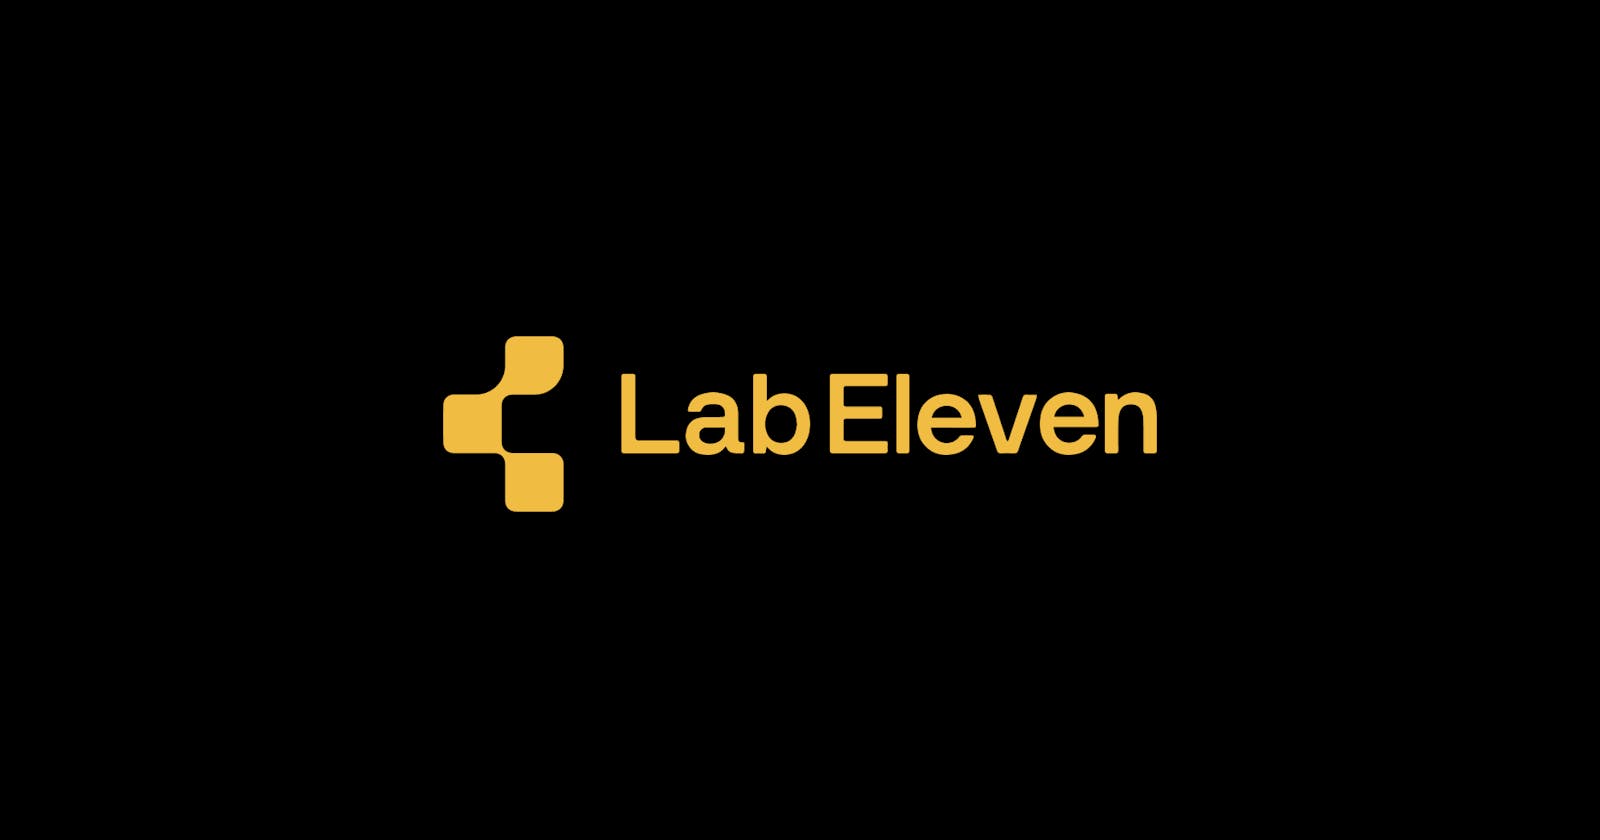 So what is this Lab Eleven thing all about?